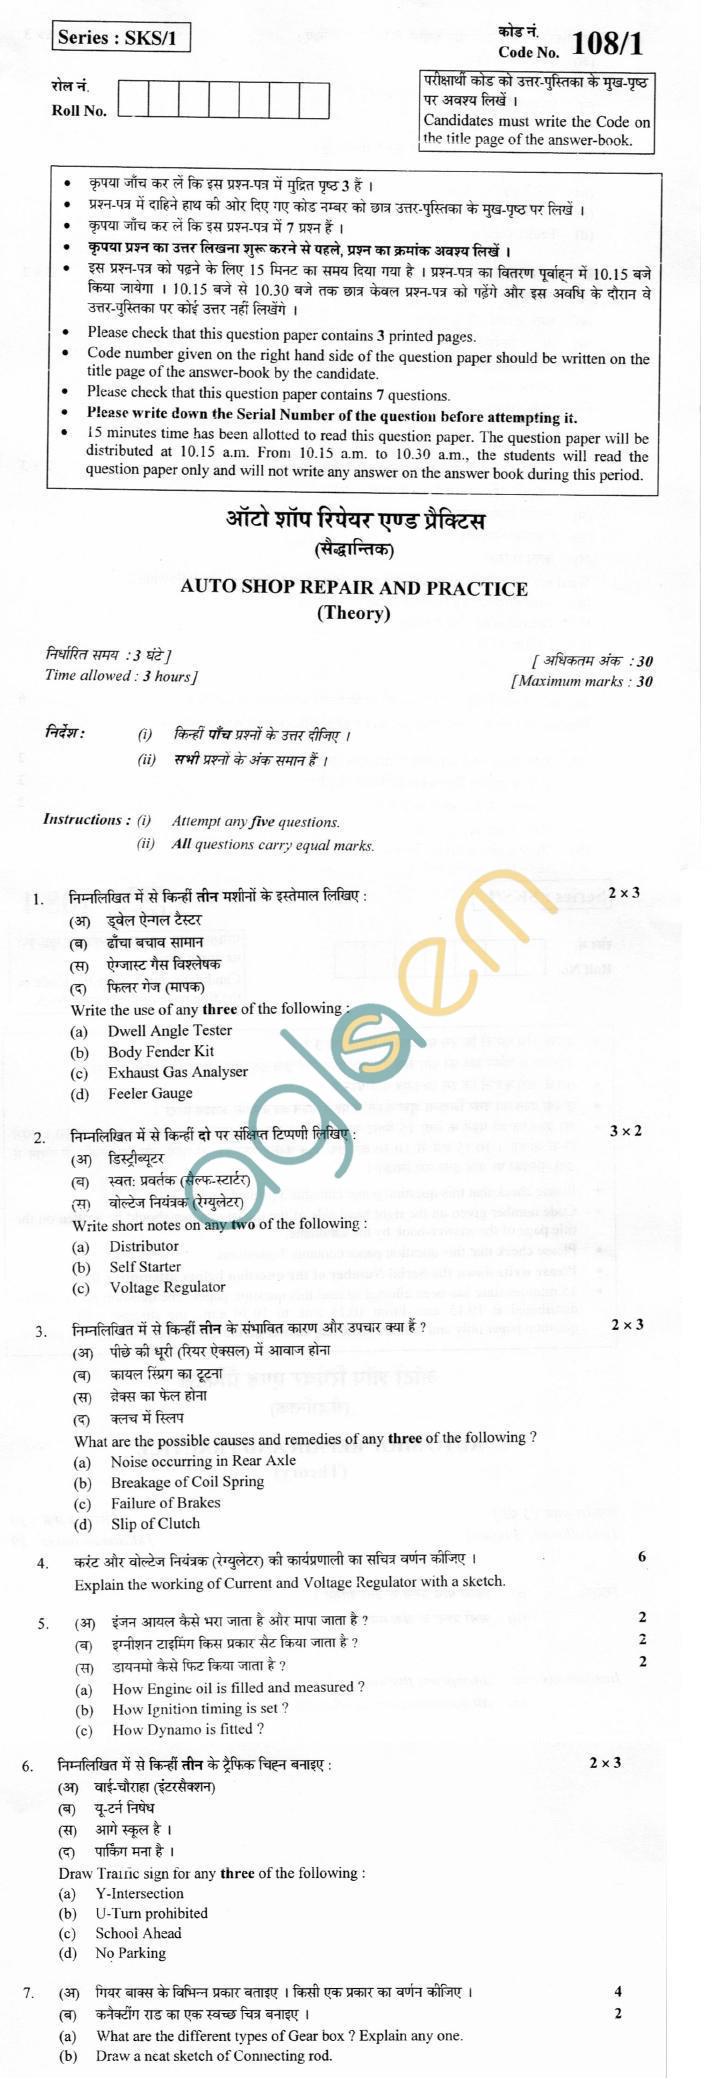 CBSE Board Exam 2013 Class XII Question Paper - Auto Shop Repair and Practice